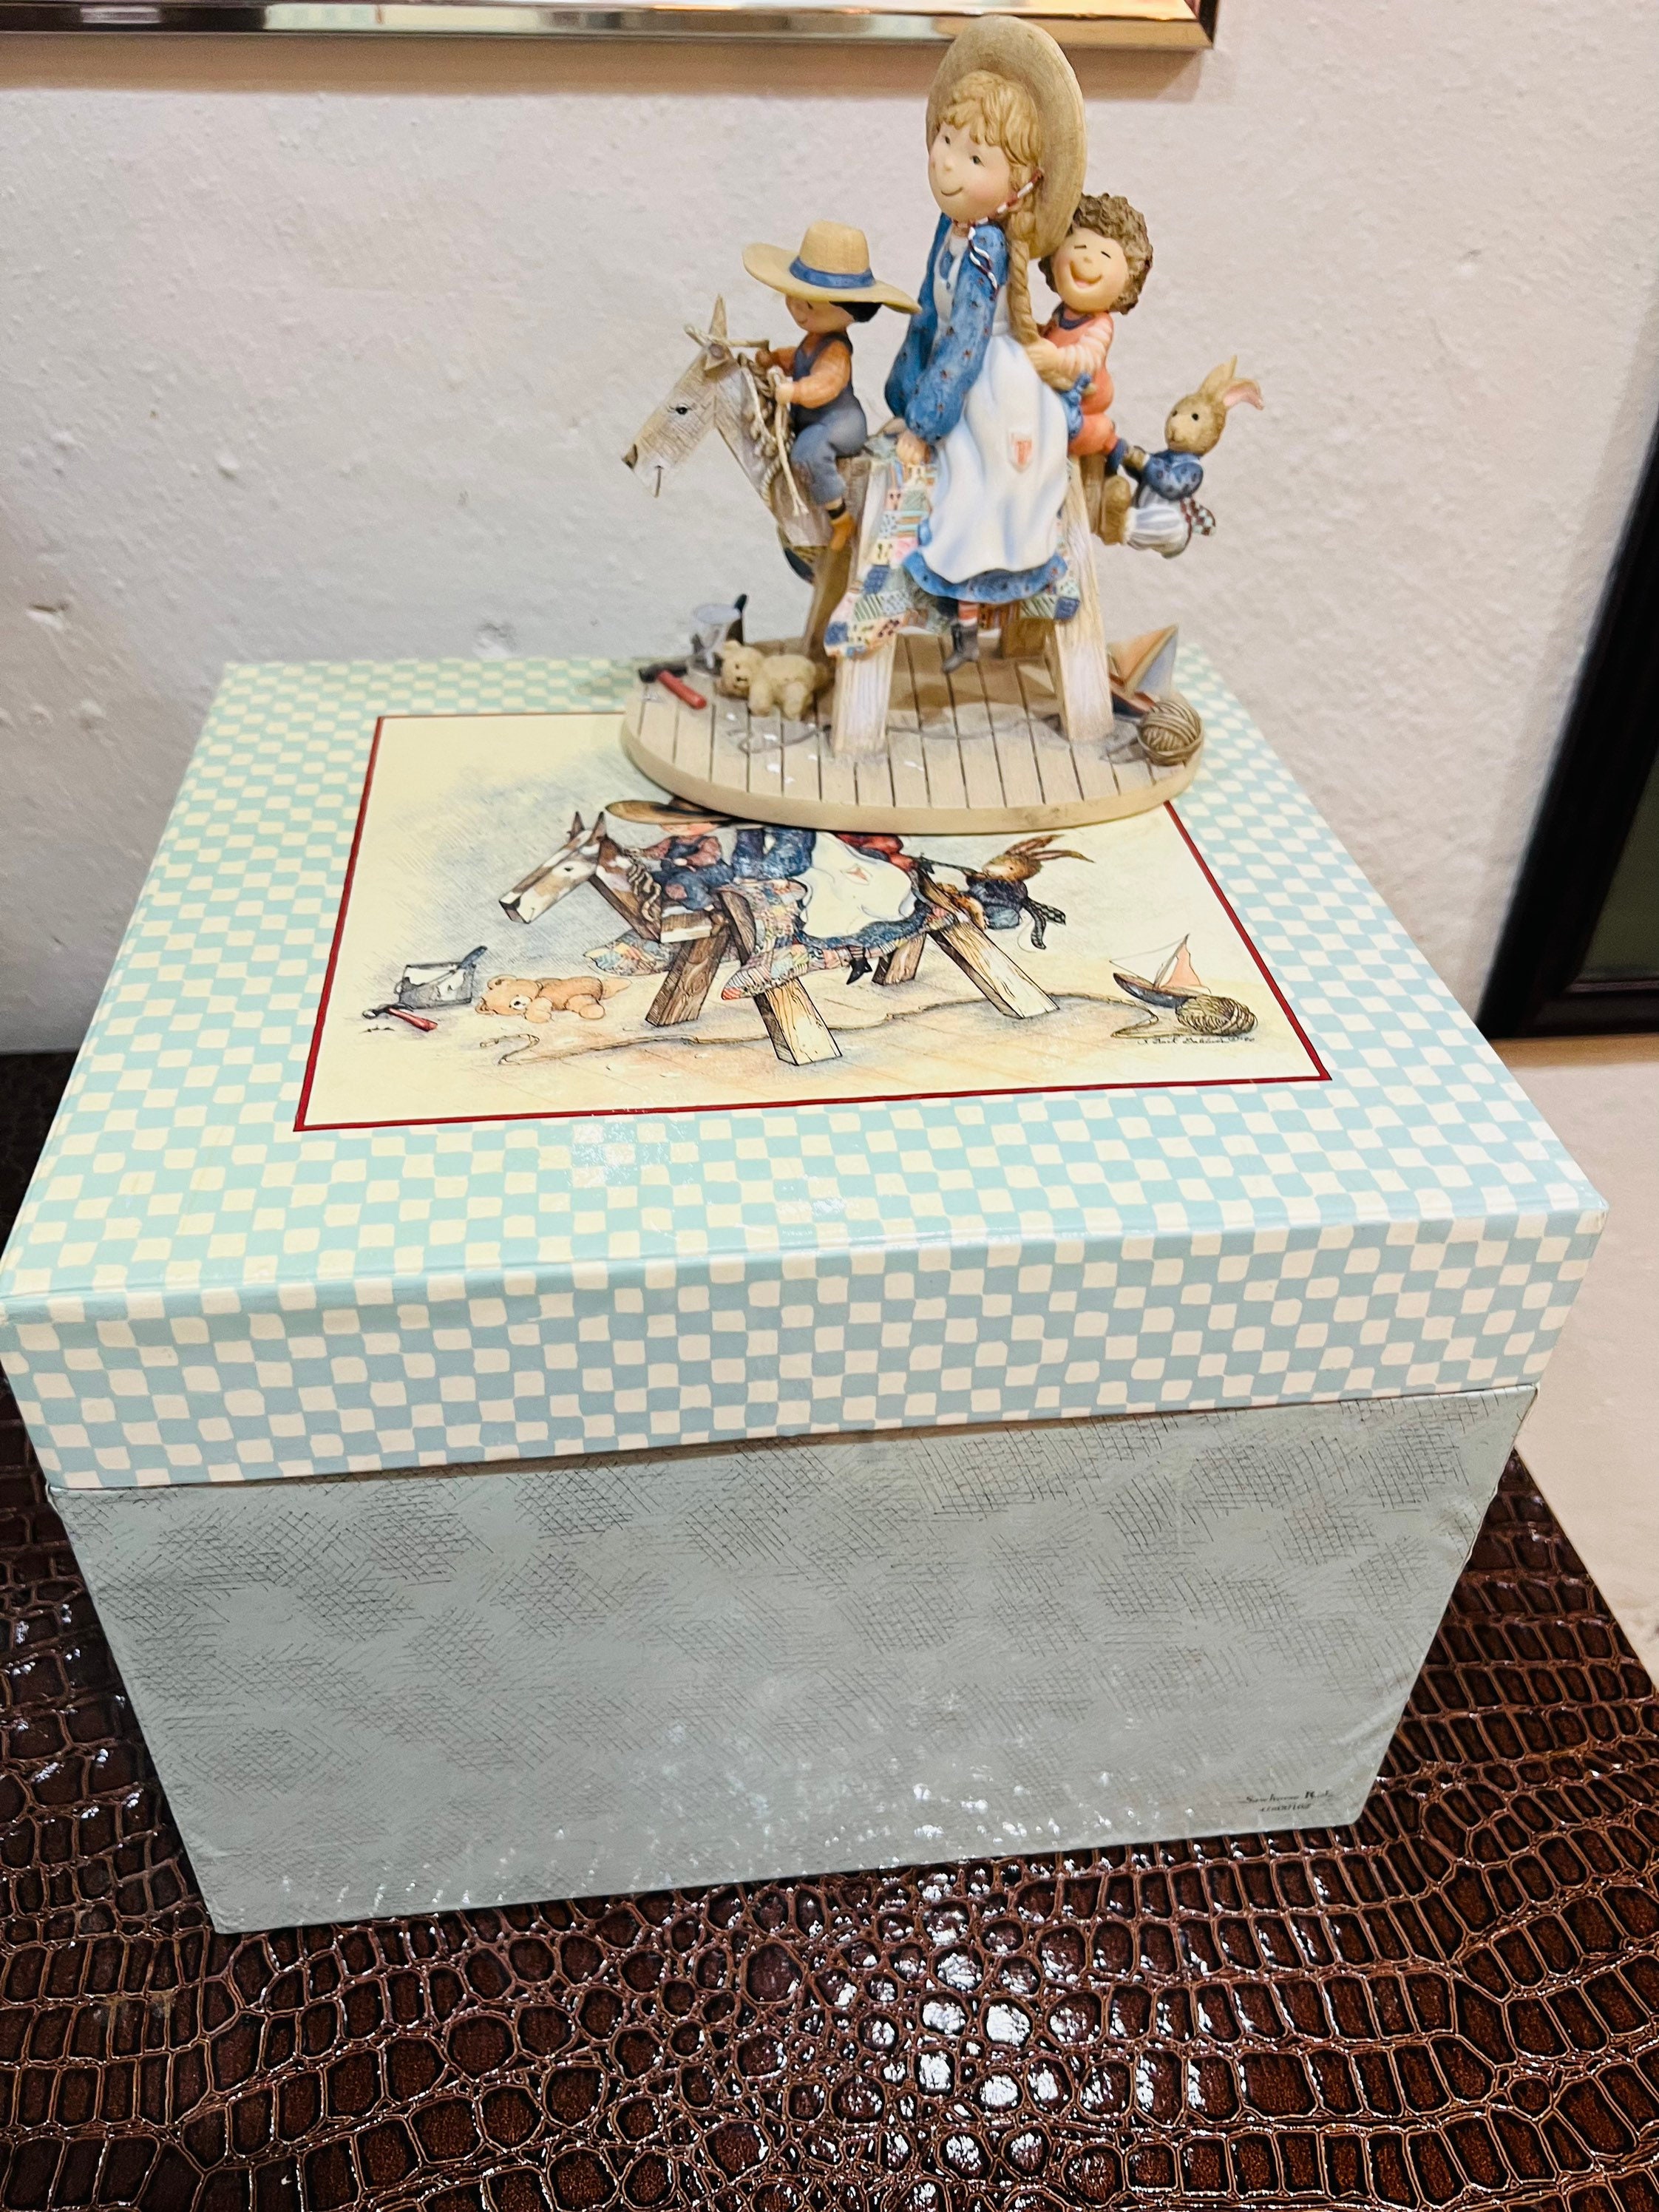 Special Friends Sawhorse Ride First Edition Sherri Buck Baldwin Lang Figurines Kids Playing Mothers Day Gifts Easter Gifts Home Decor Bunny